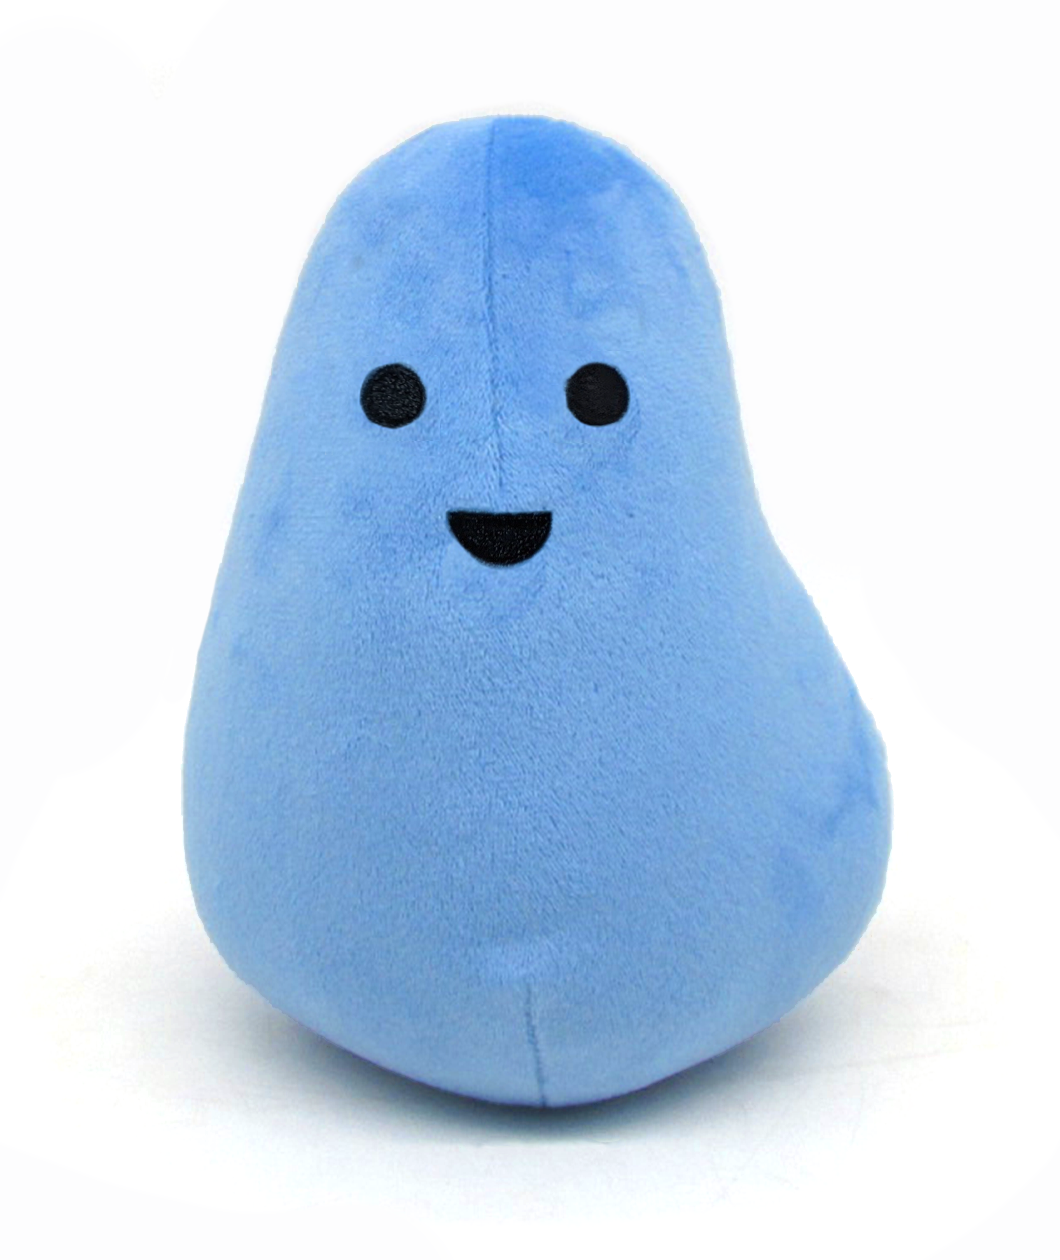 An ovular blue plushie with a wide base and thinner top. Two black circles act as the eyes and a half circle is the mouth - from Primer